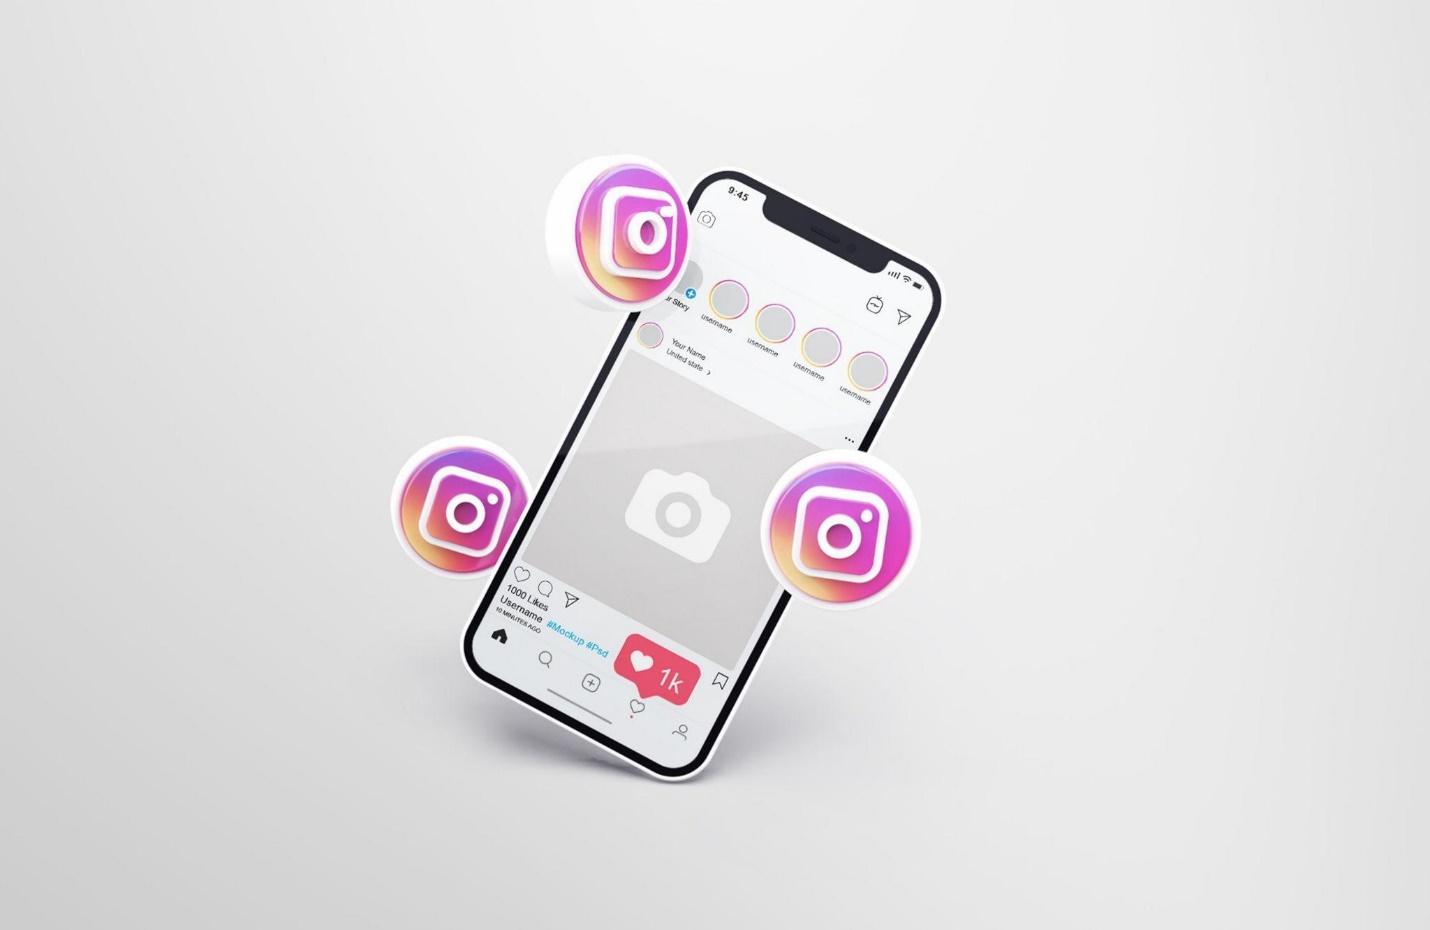 Buy Instagram Followers: Get Real & Instant IG Followers In 2022 - Orlando  Magazine